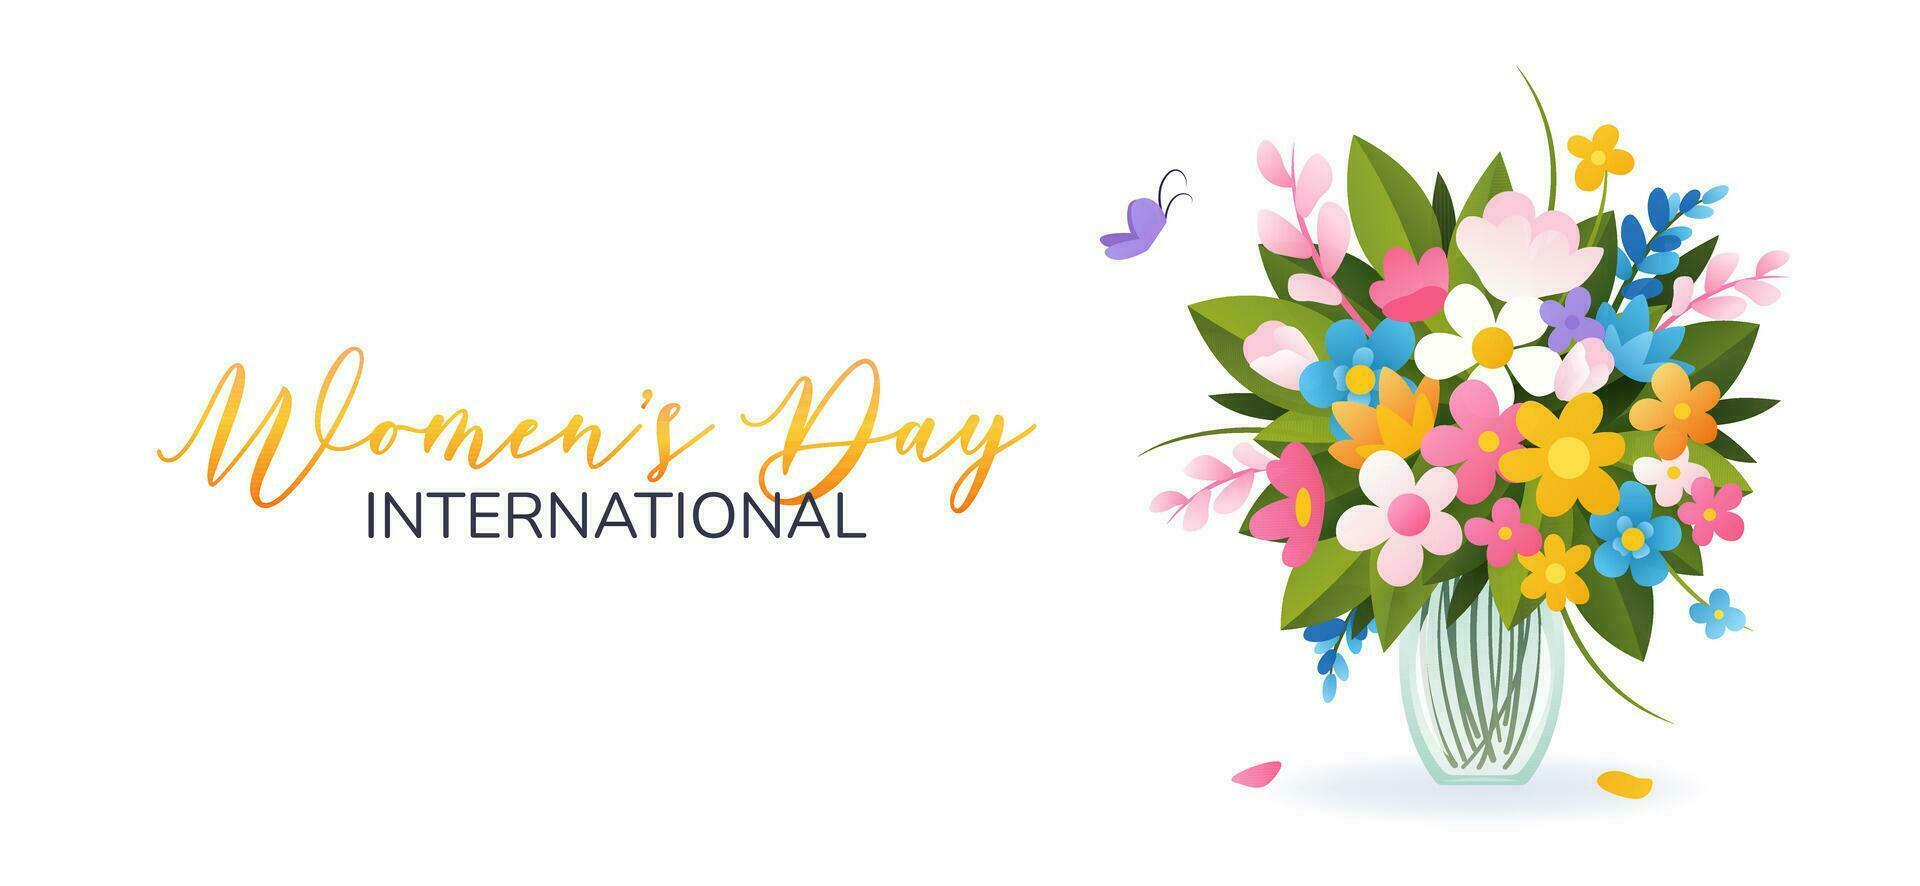 International Women's Day. 8 March. Banner with isolated vase and bouquet of various spring flowers on white background. Modern vector design for poster, campaign, social media post.